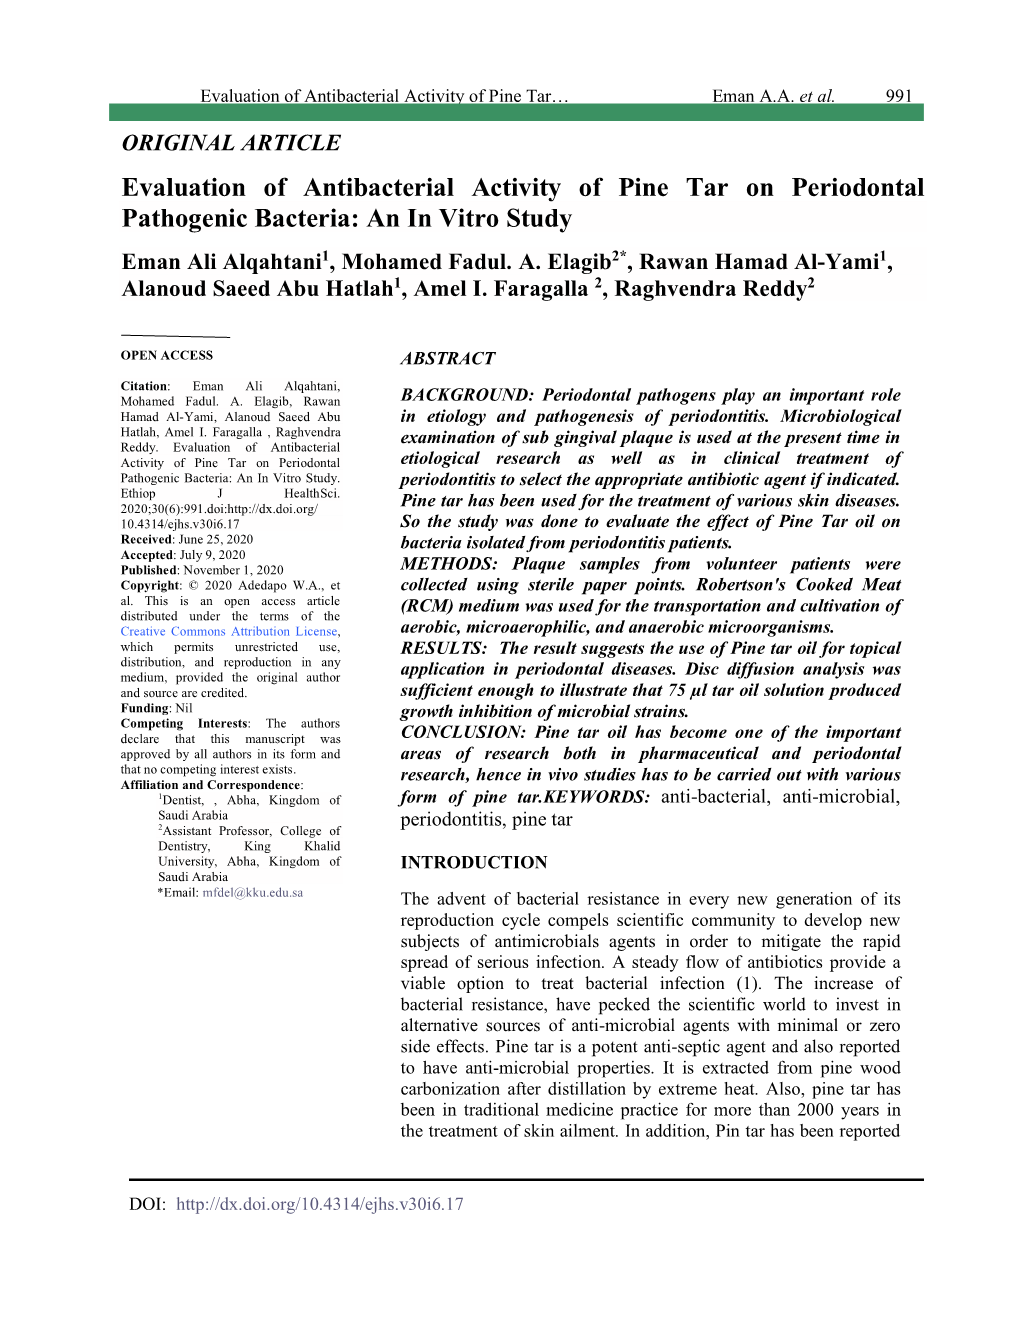 Evaluation of Antibacterial Activity of Pine Tar on Periodontal Pathogenic Bacteria: an in Vitro Study